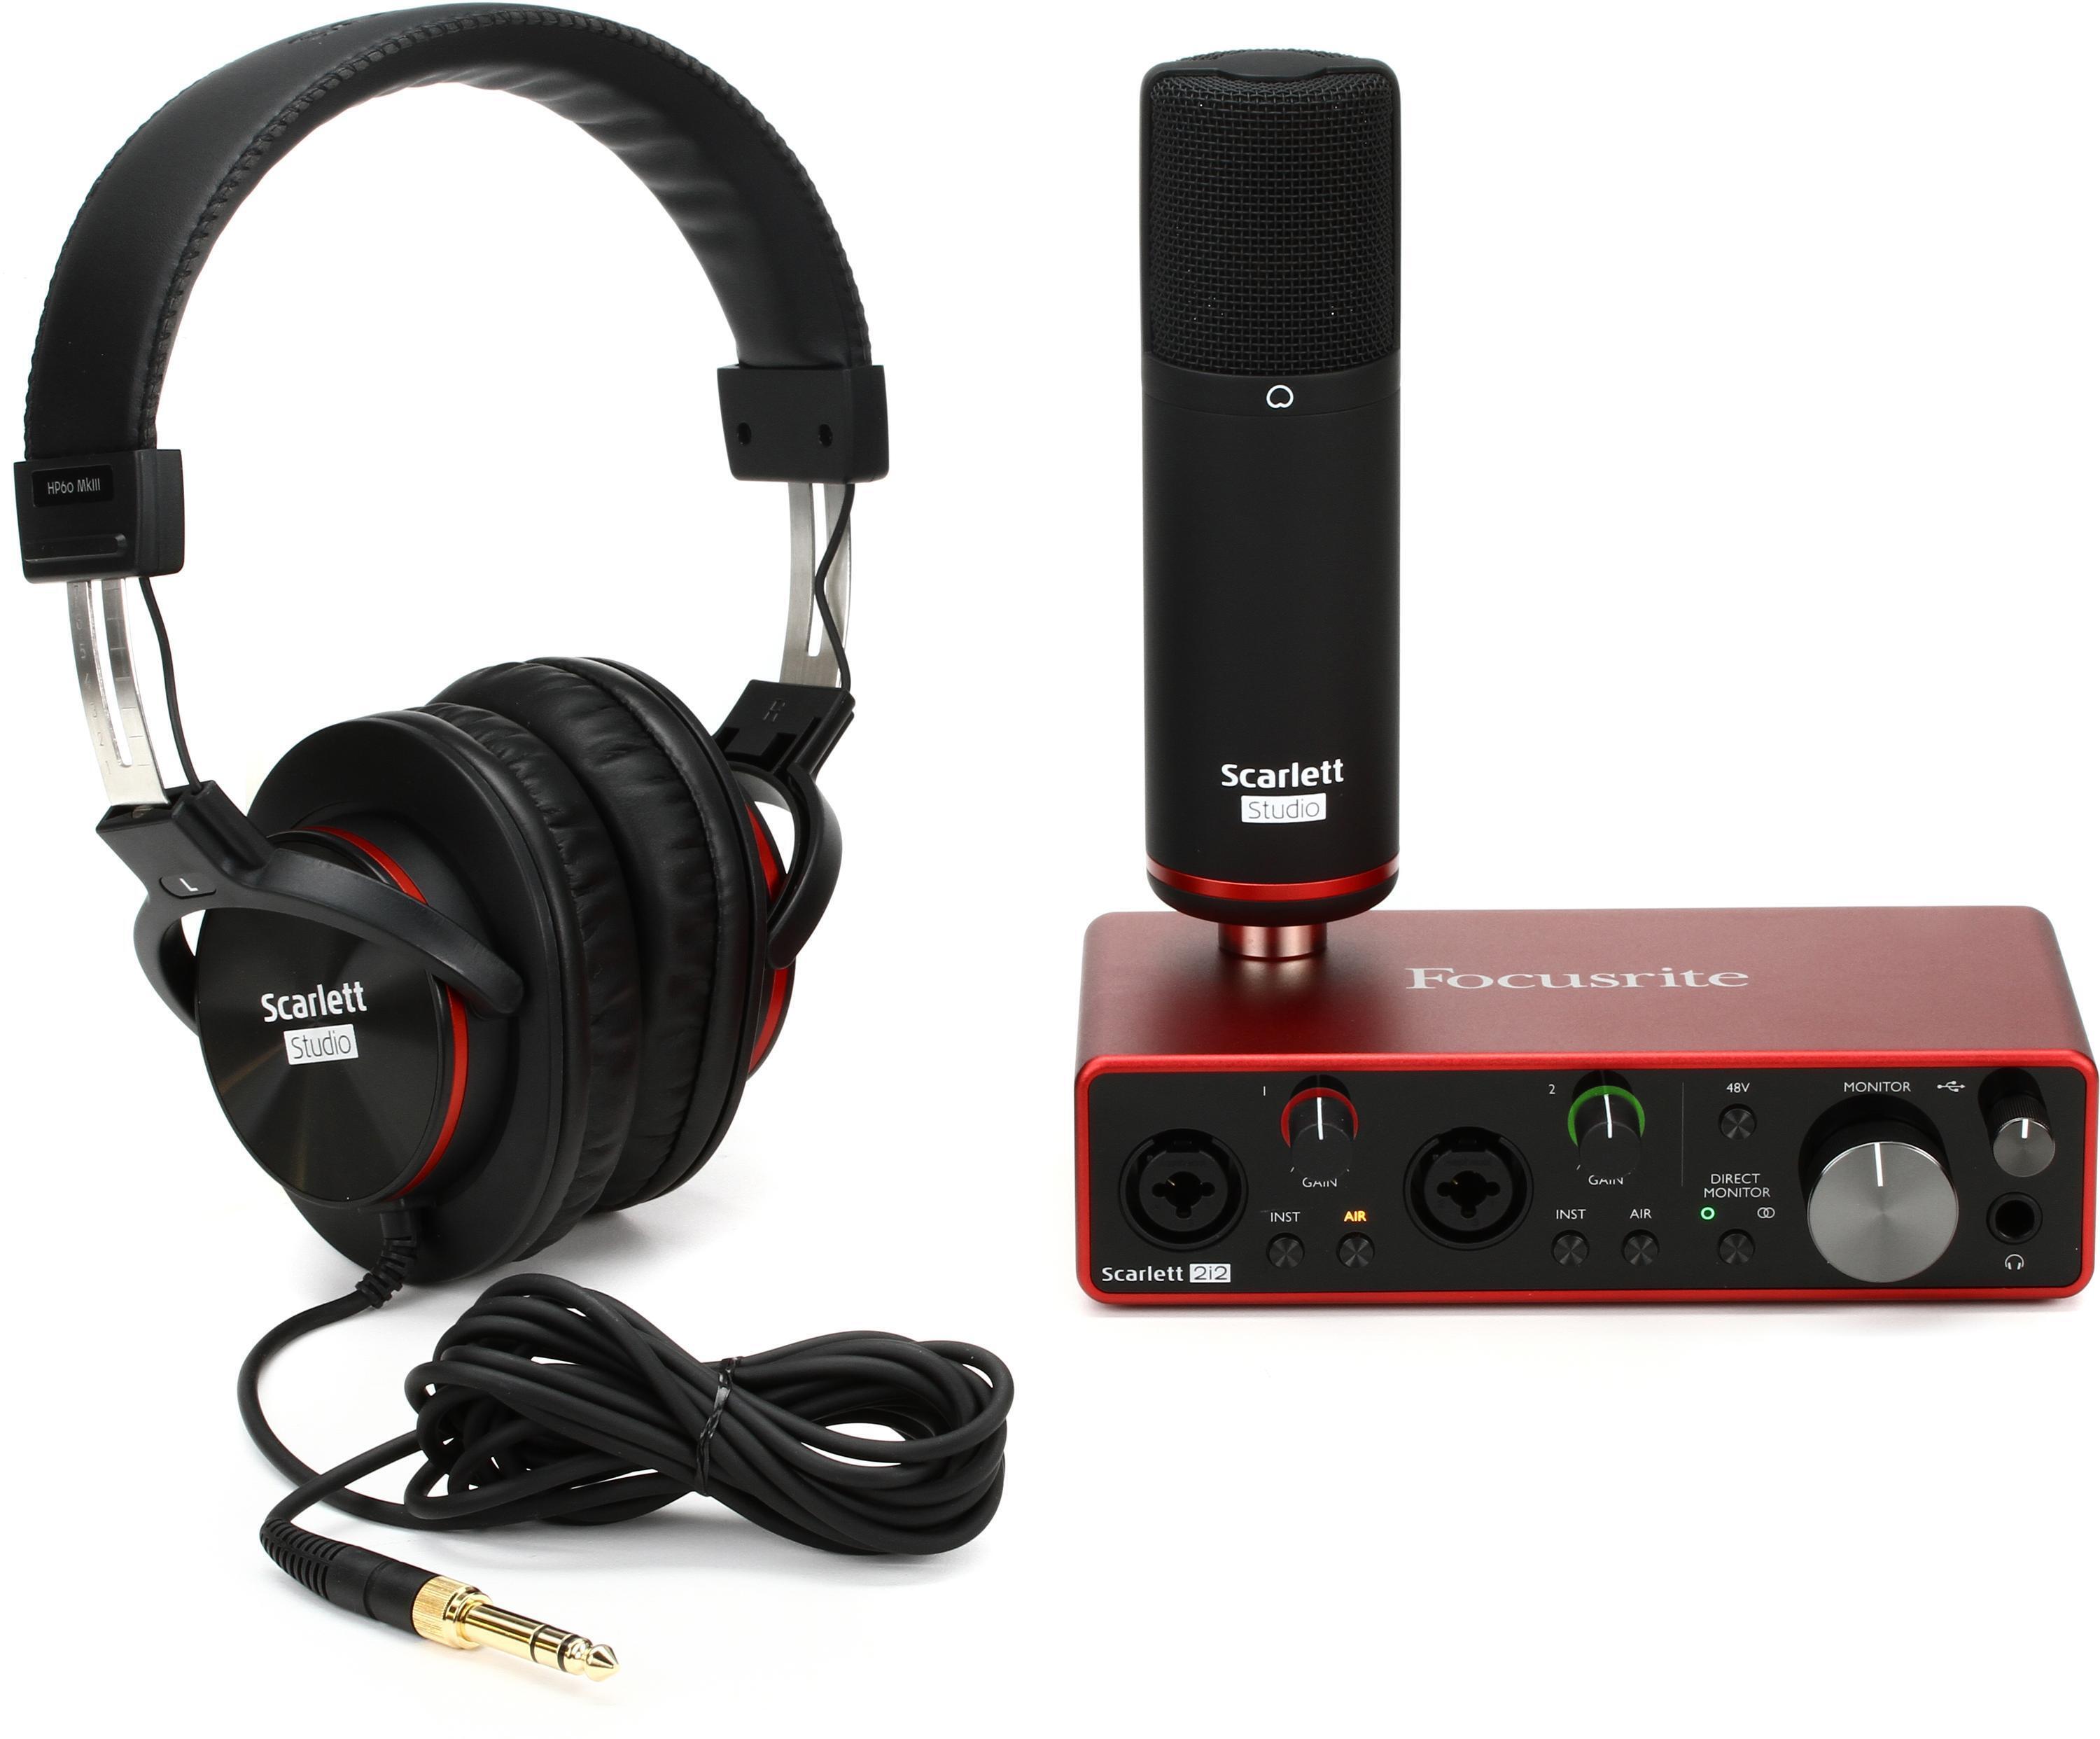 Focusrite Scarlett Solo Studio Pack with Microphone and Headphones